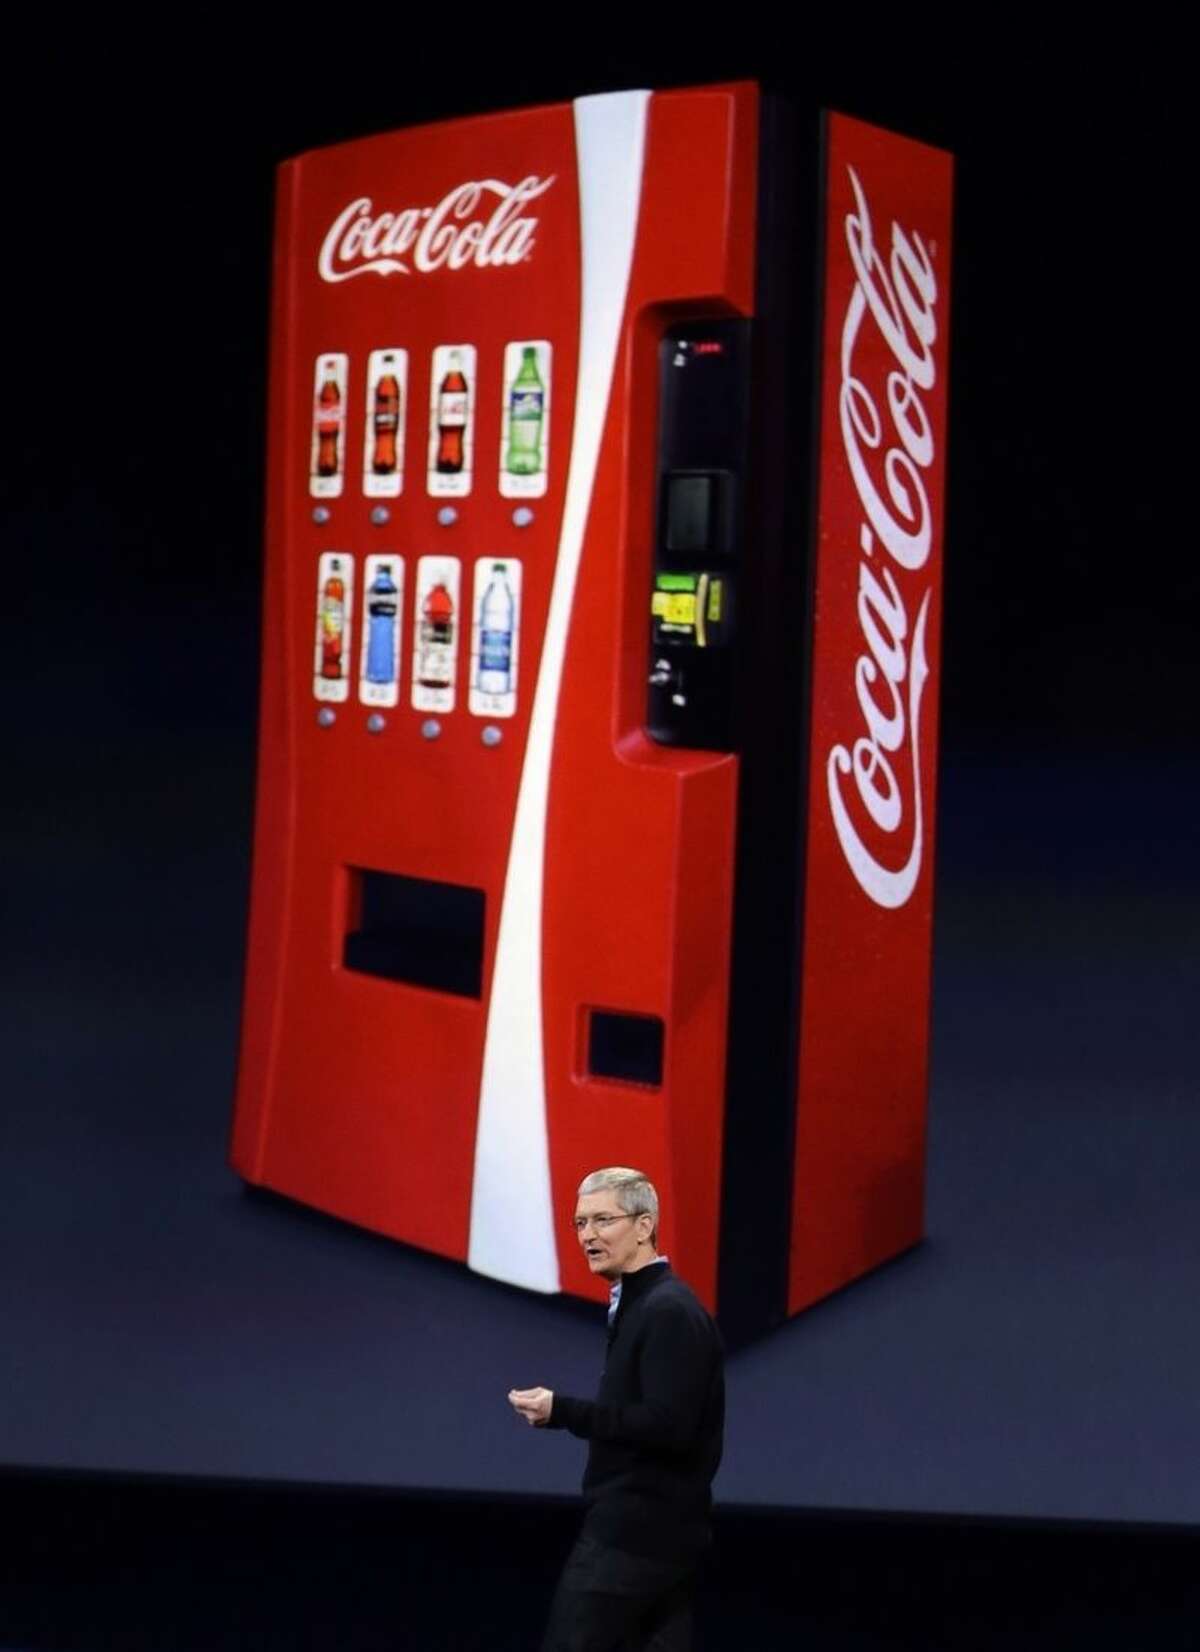 Apple CEO Tim Cook talks about using Apple Pay with Coca-Cola vending machines, during an Apple event on Monday, March 9, 2015, in San Francisco. (AP Photo/Eric Risberg)